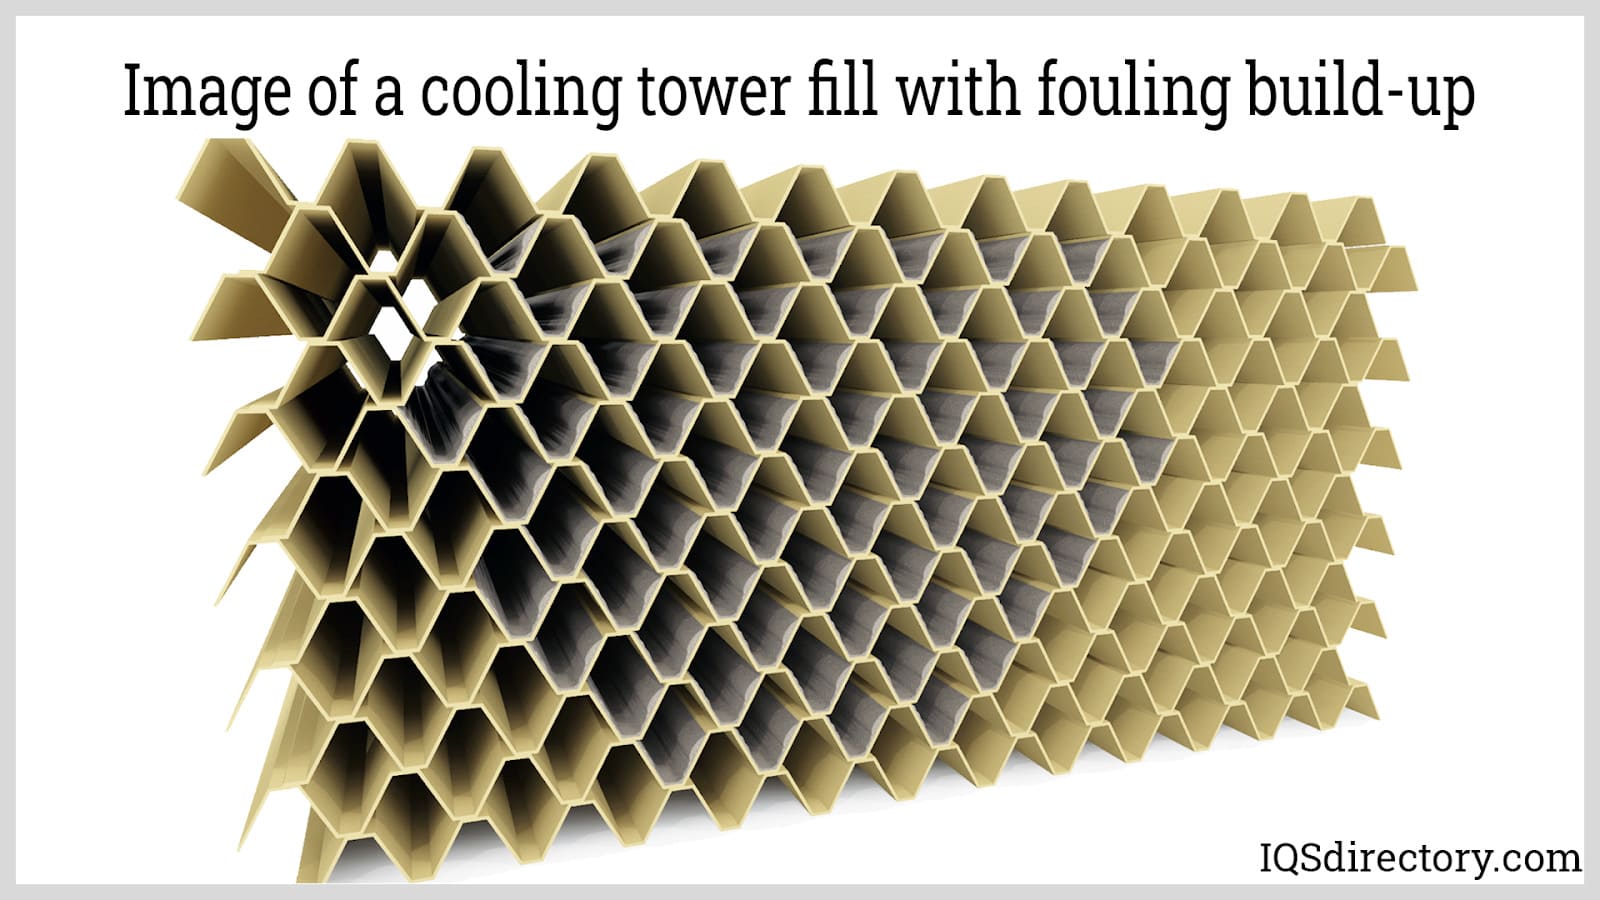 Image of a cooling tower fill with fouling build-up